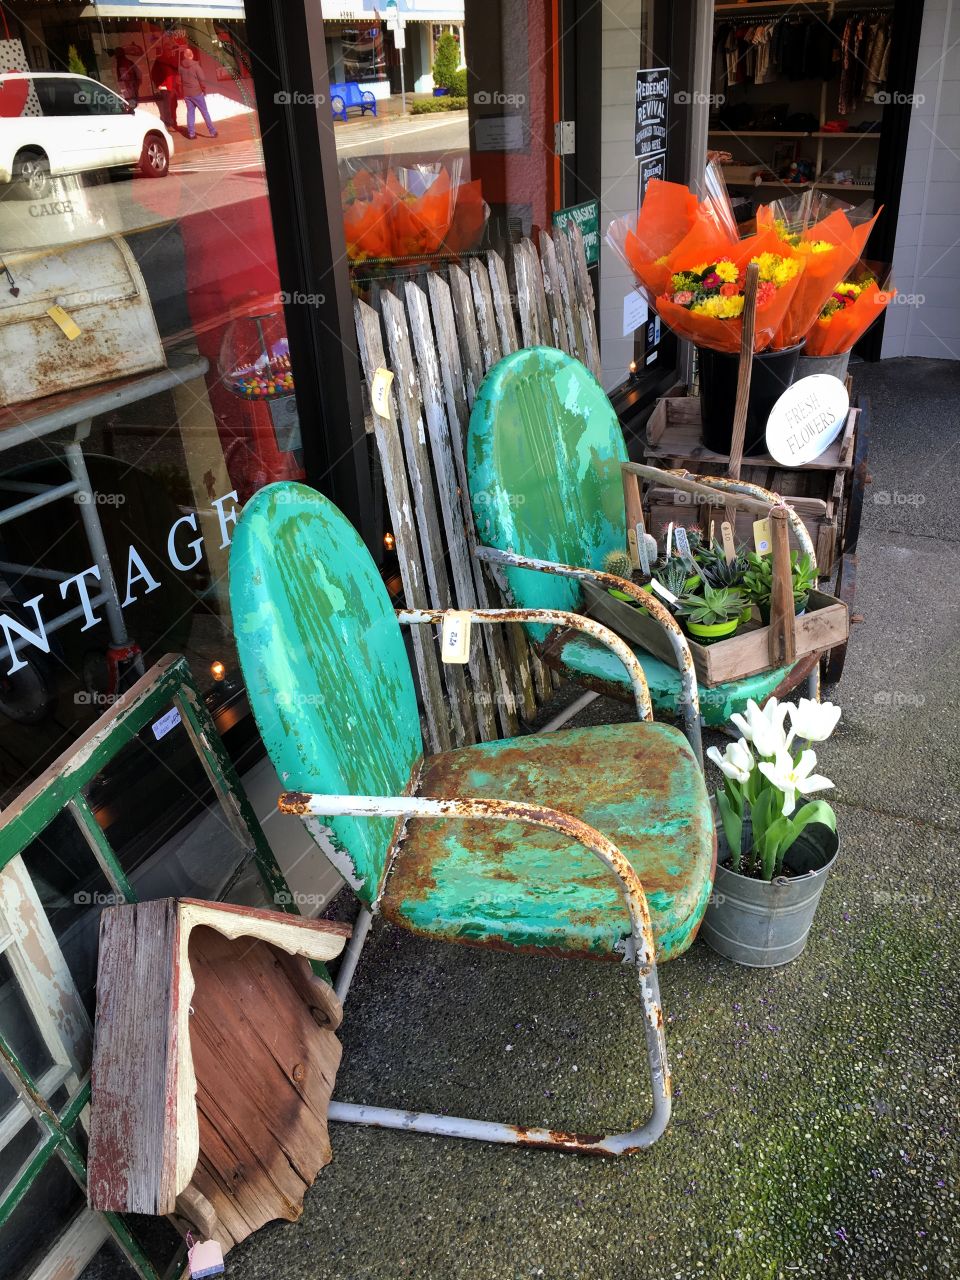 Vintage Patio Chairs 